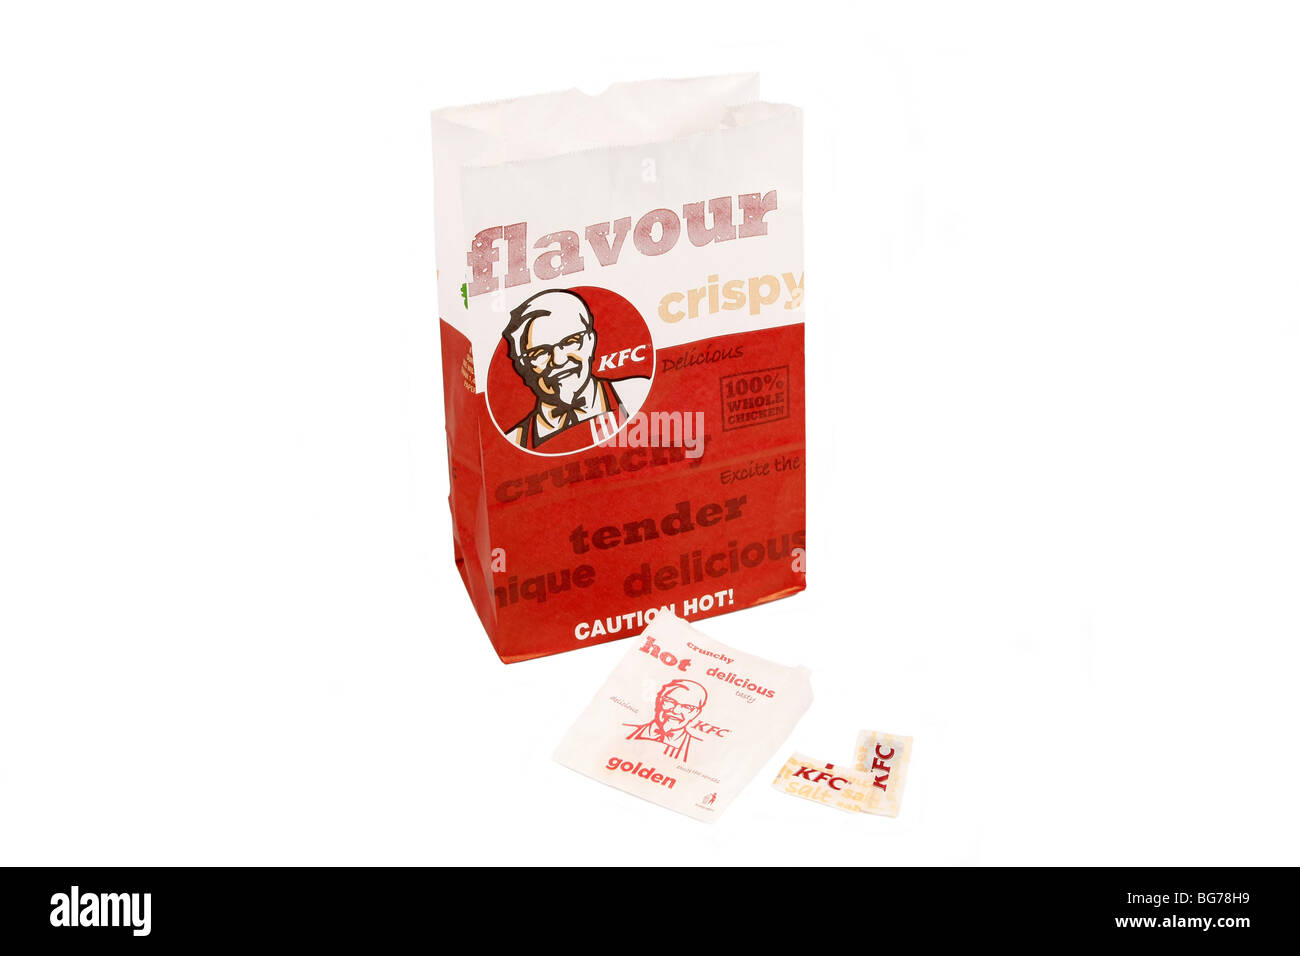 Kentucky Fried Chicken Meal to go bags against a white background Stock Photo